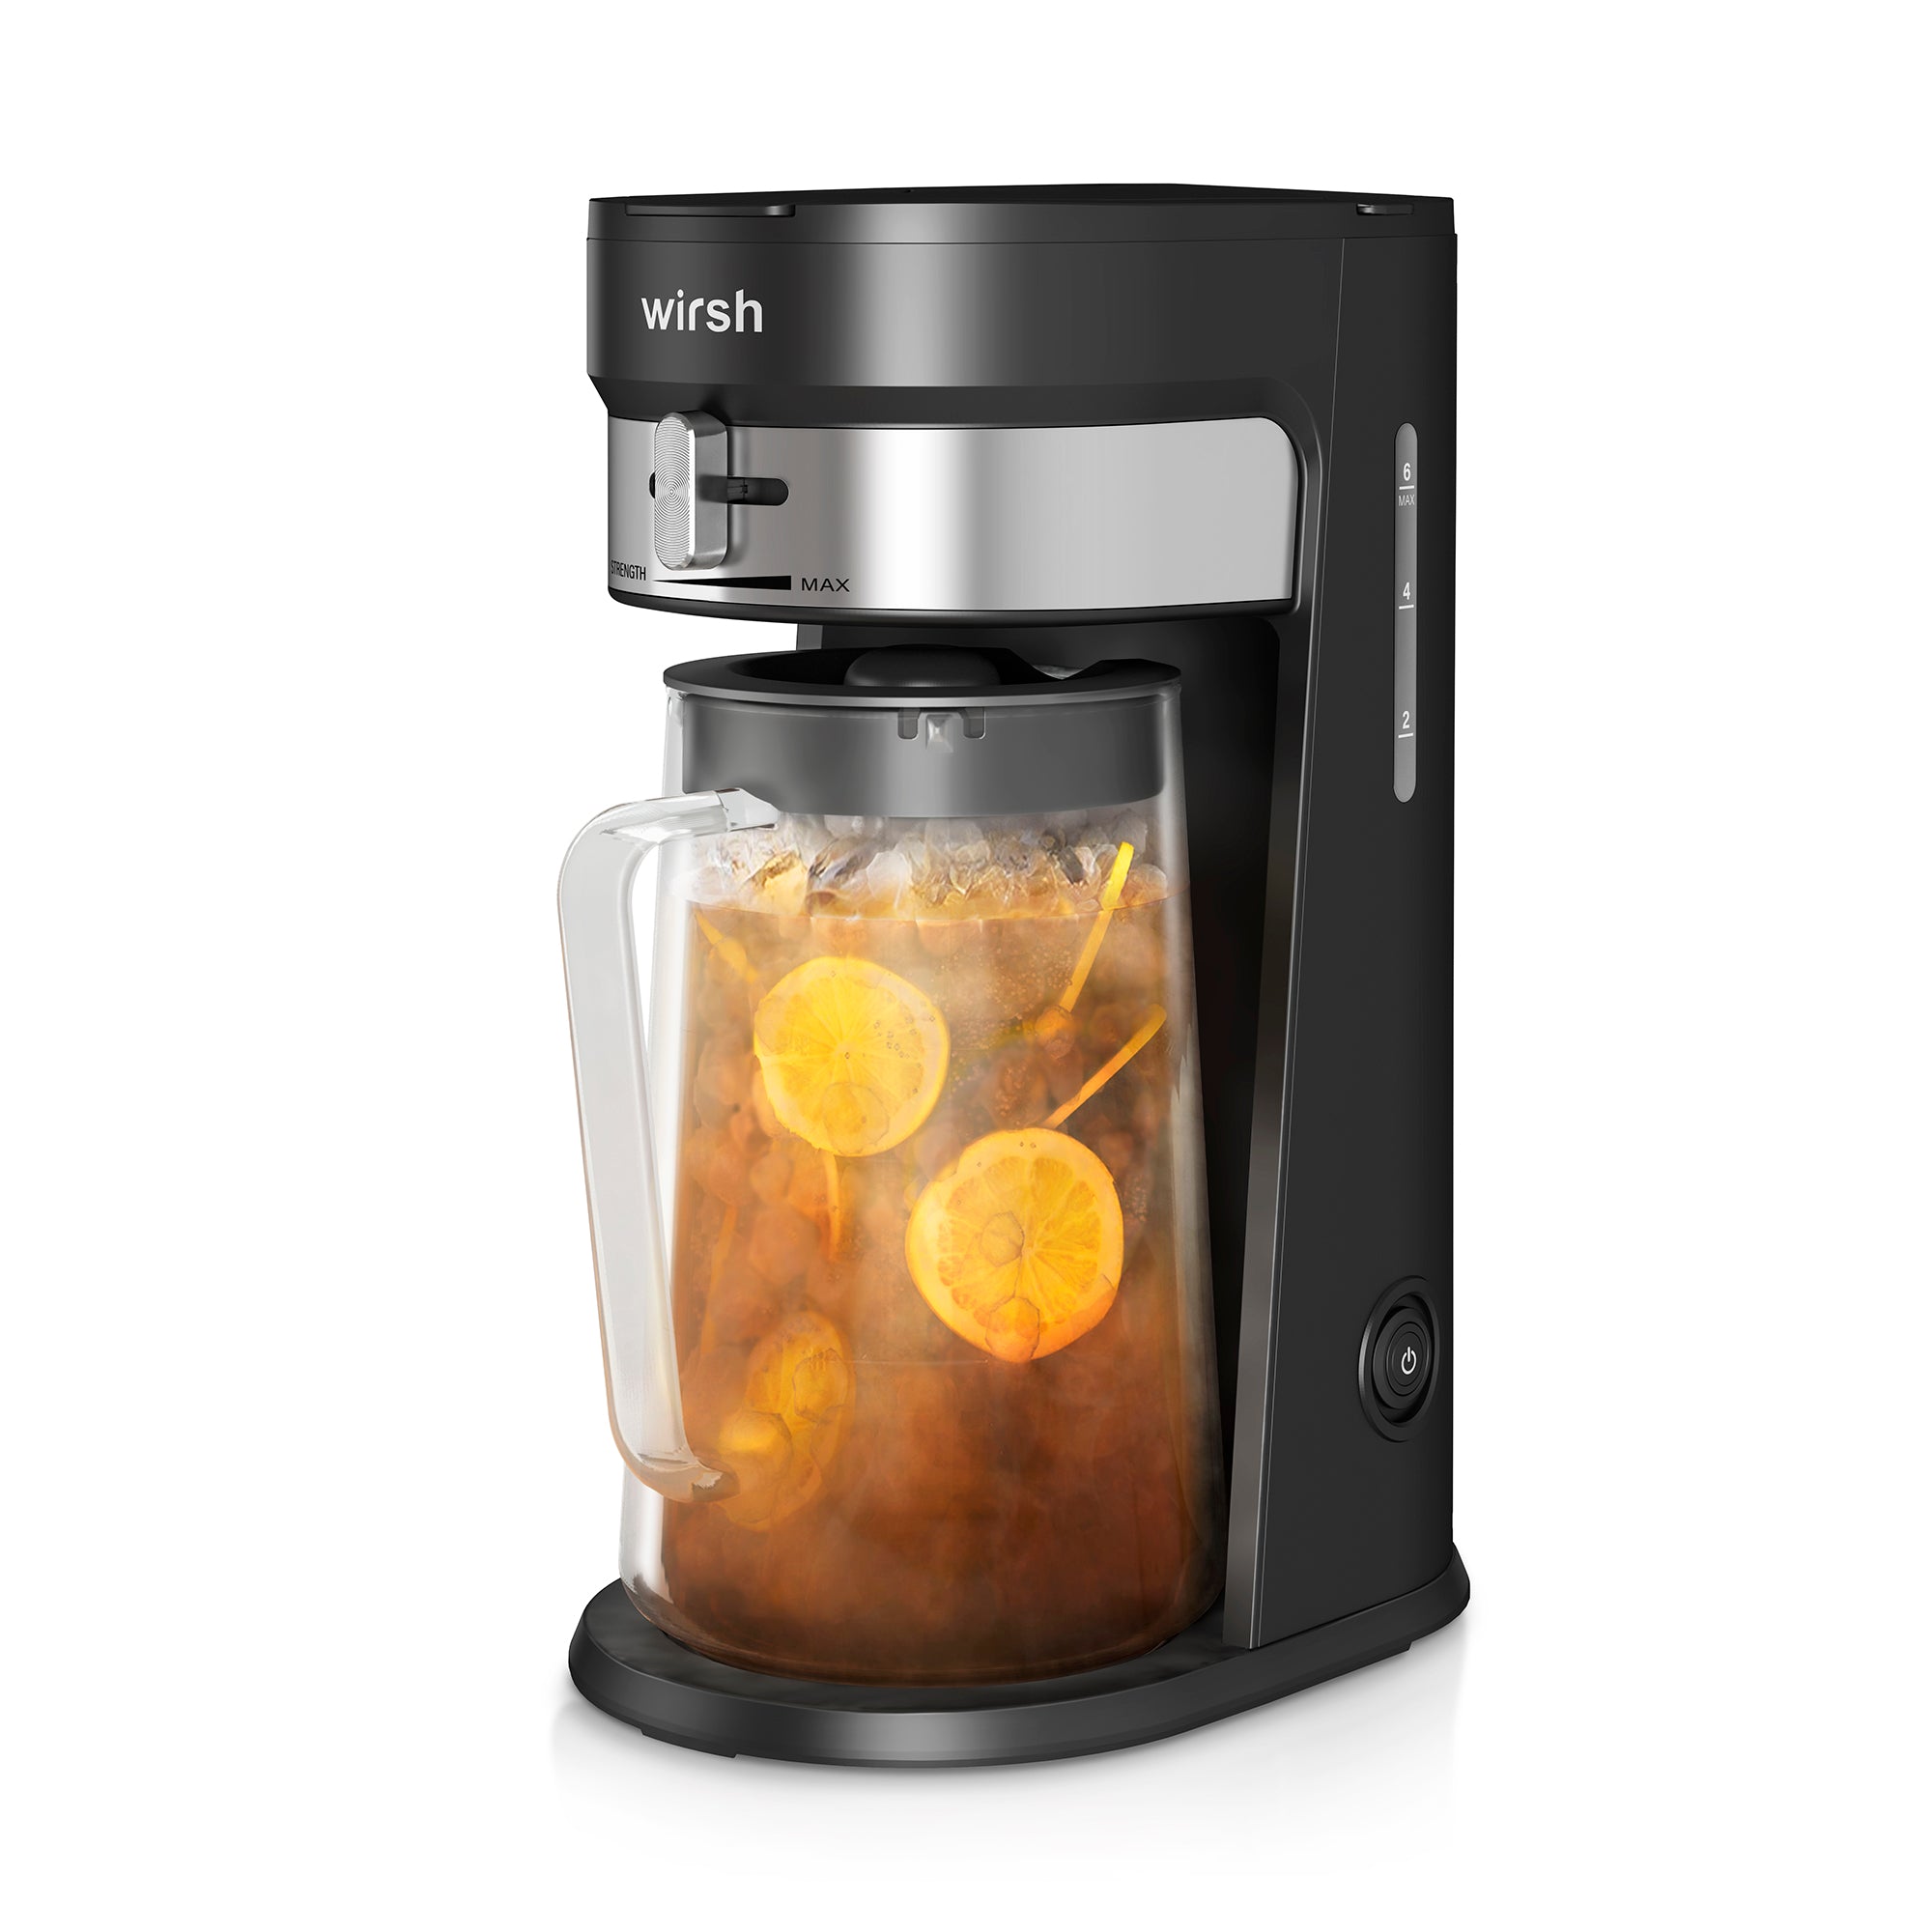 West Bend Iced Tea and Iced Coffee Maker in Black Stainless Steel